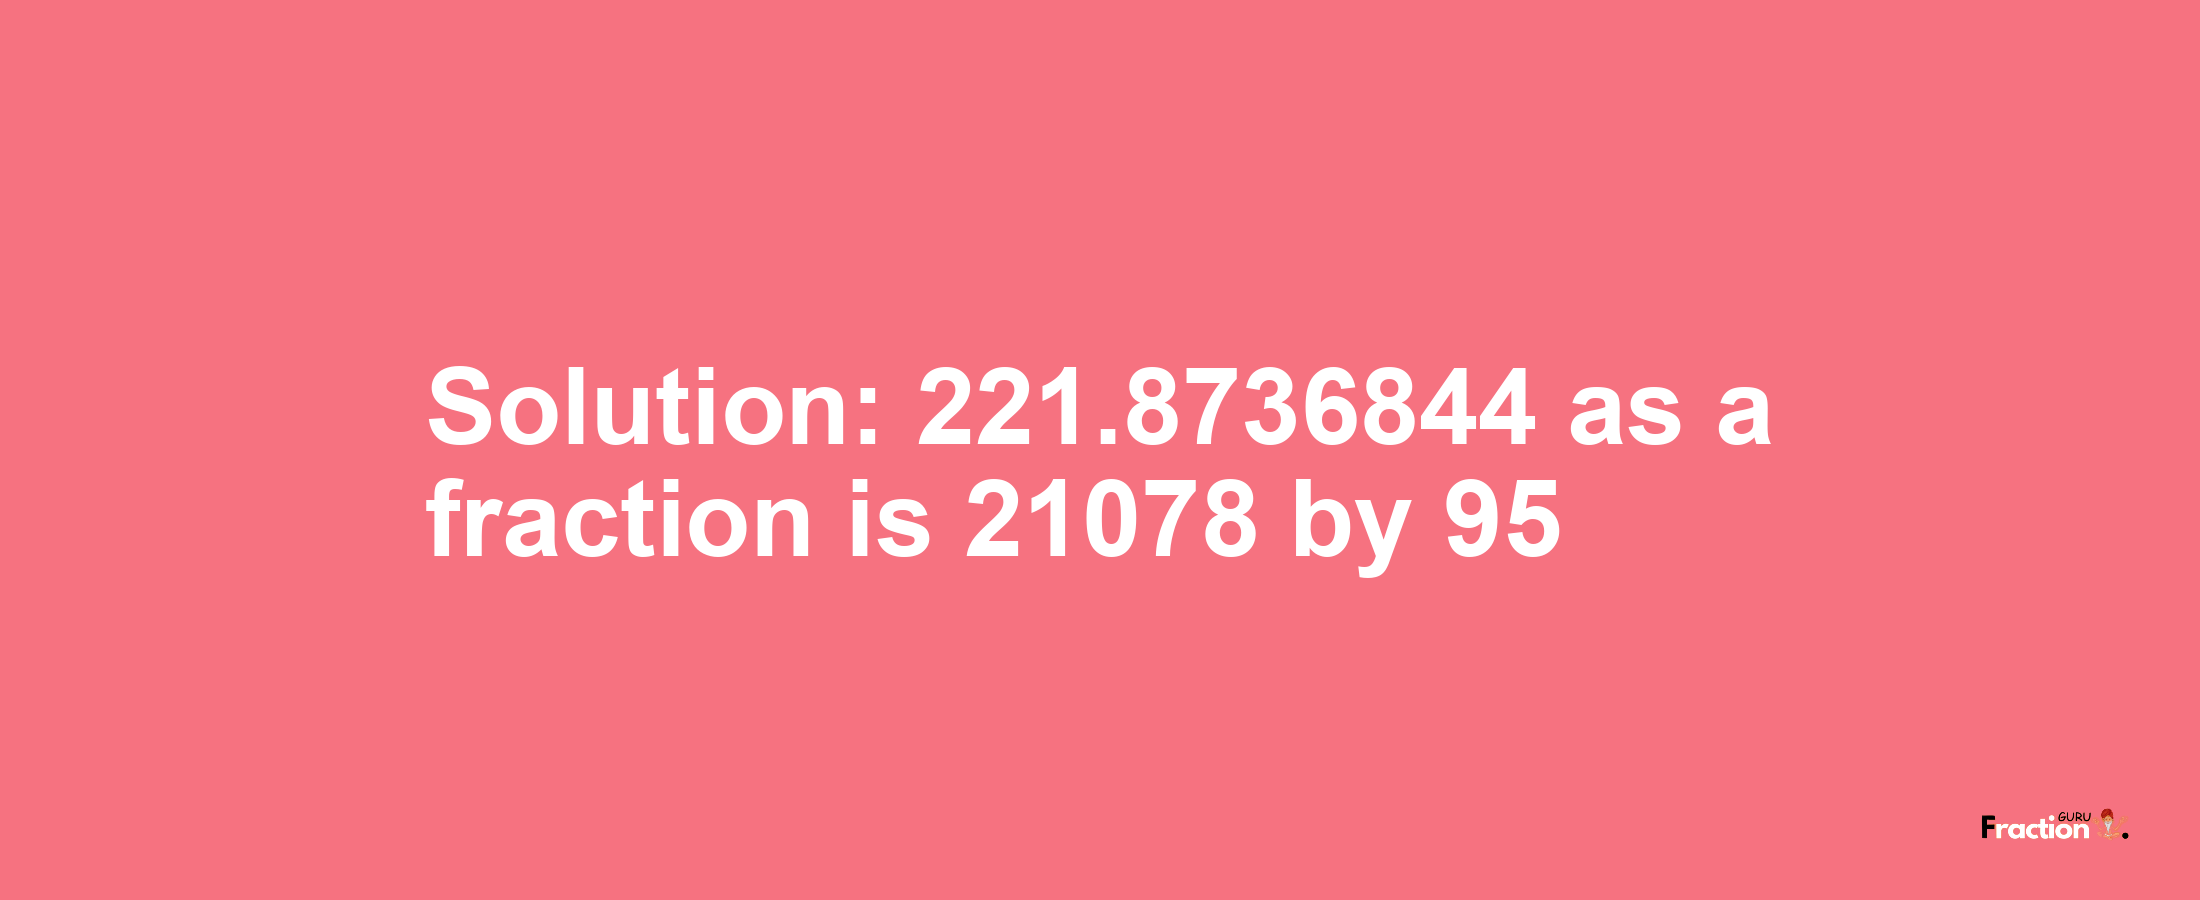 Solution:221.8736844 as a fraction is 21078/95